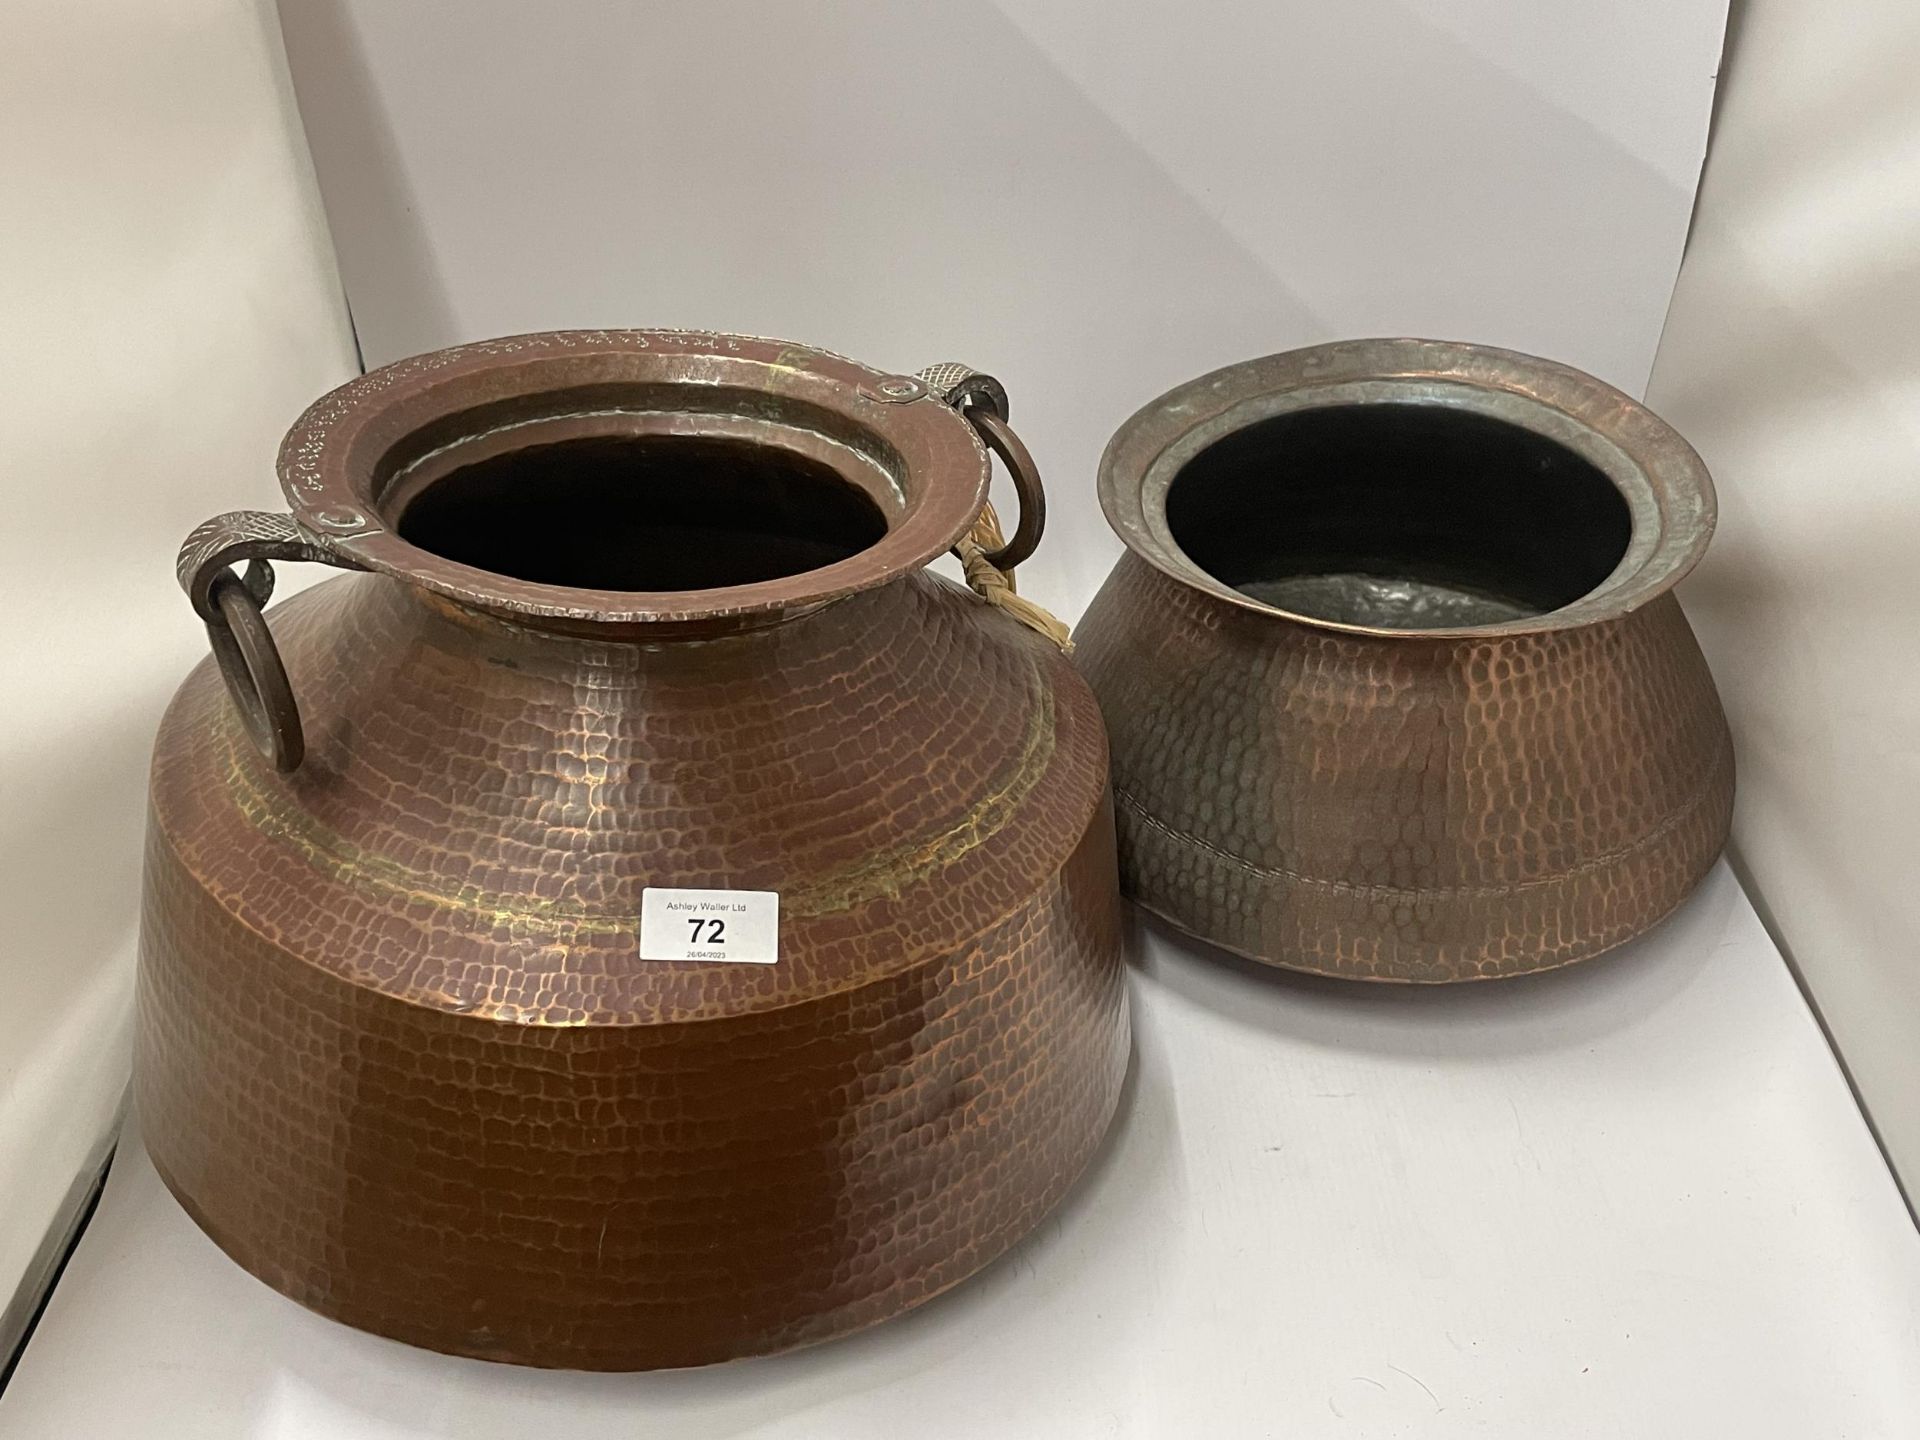 TWO VINTAGE MIDDLE EASTERN COOKING POTS - ONE WITH LOOP HANDLES